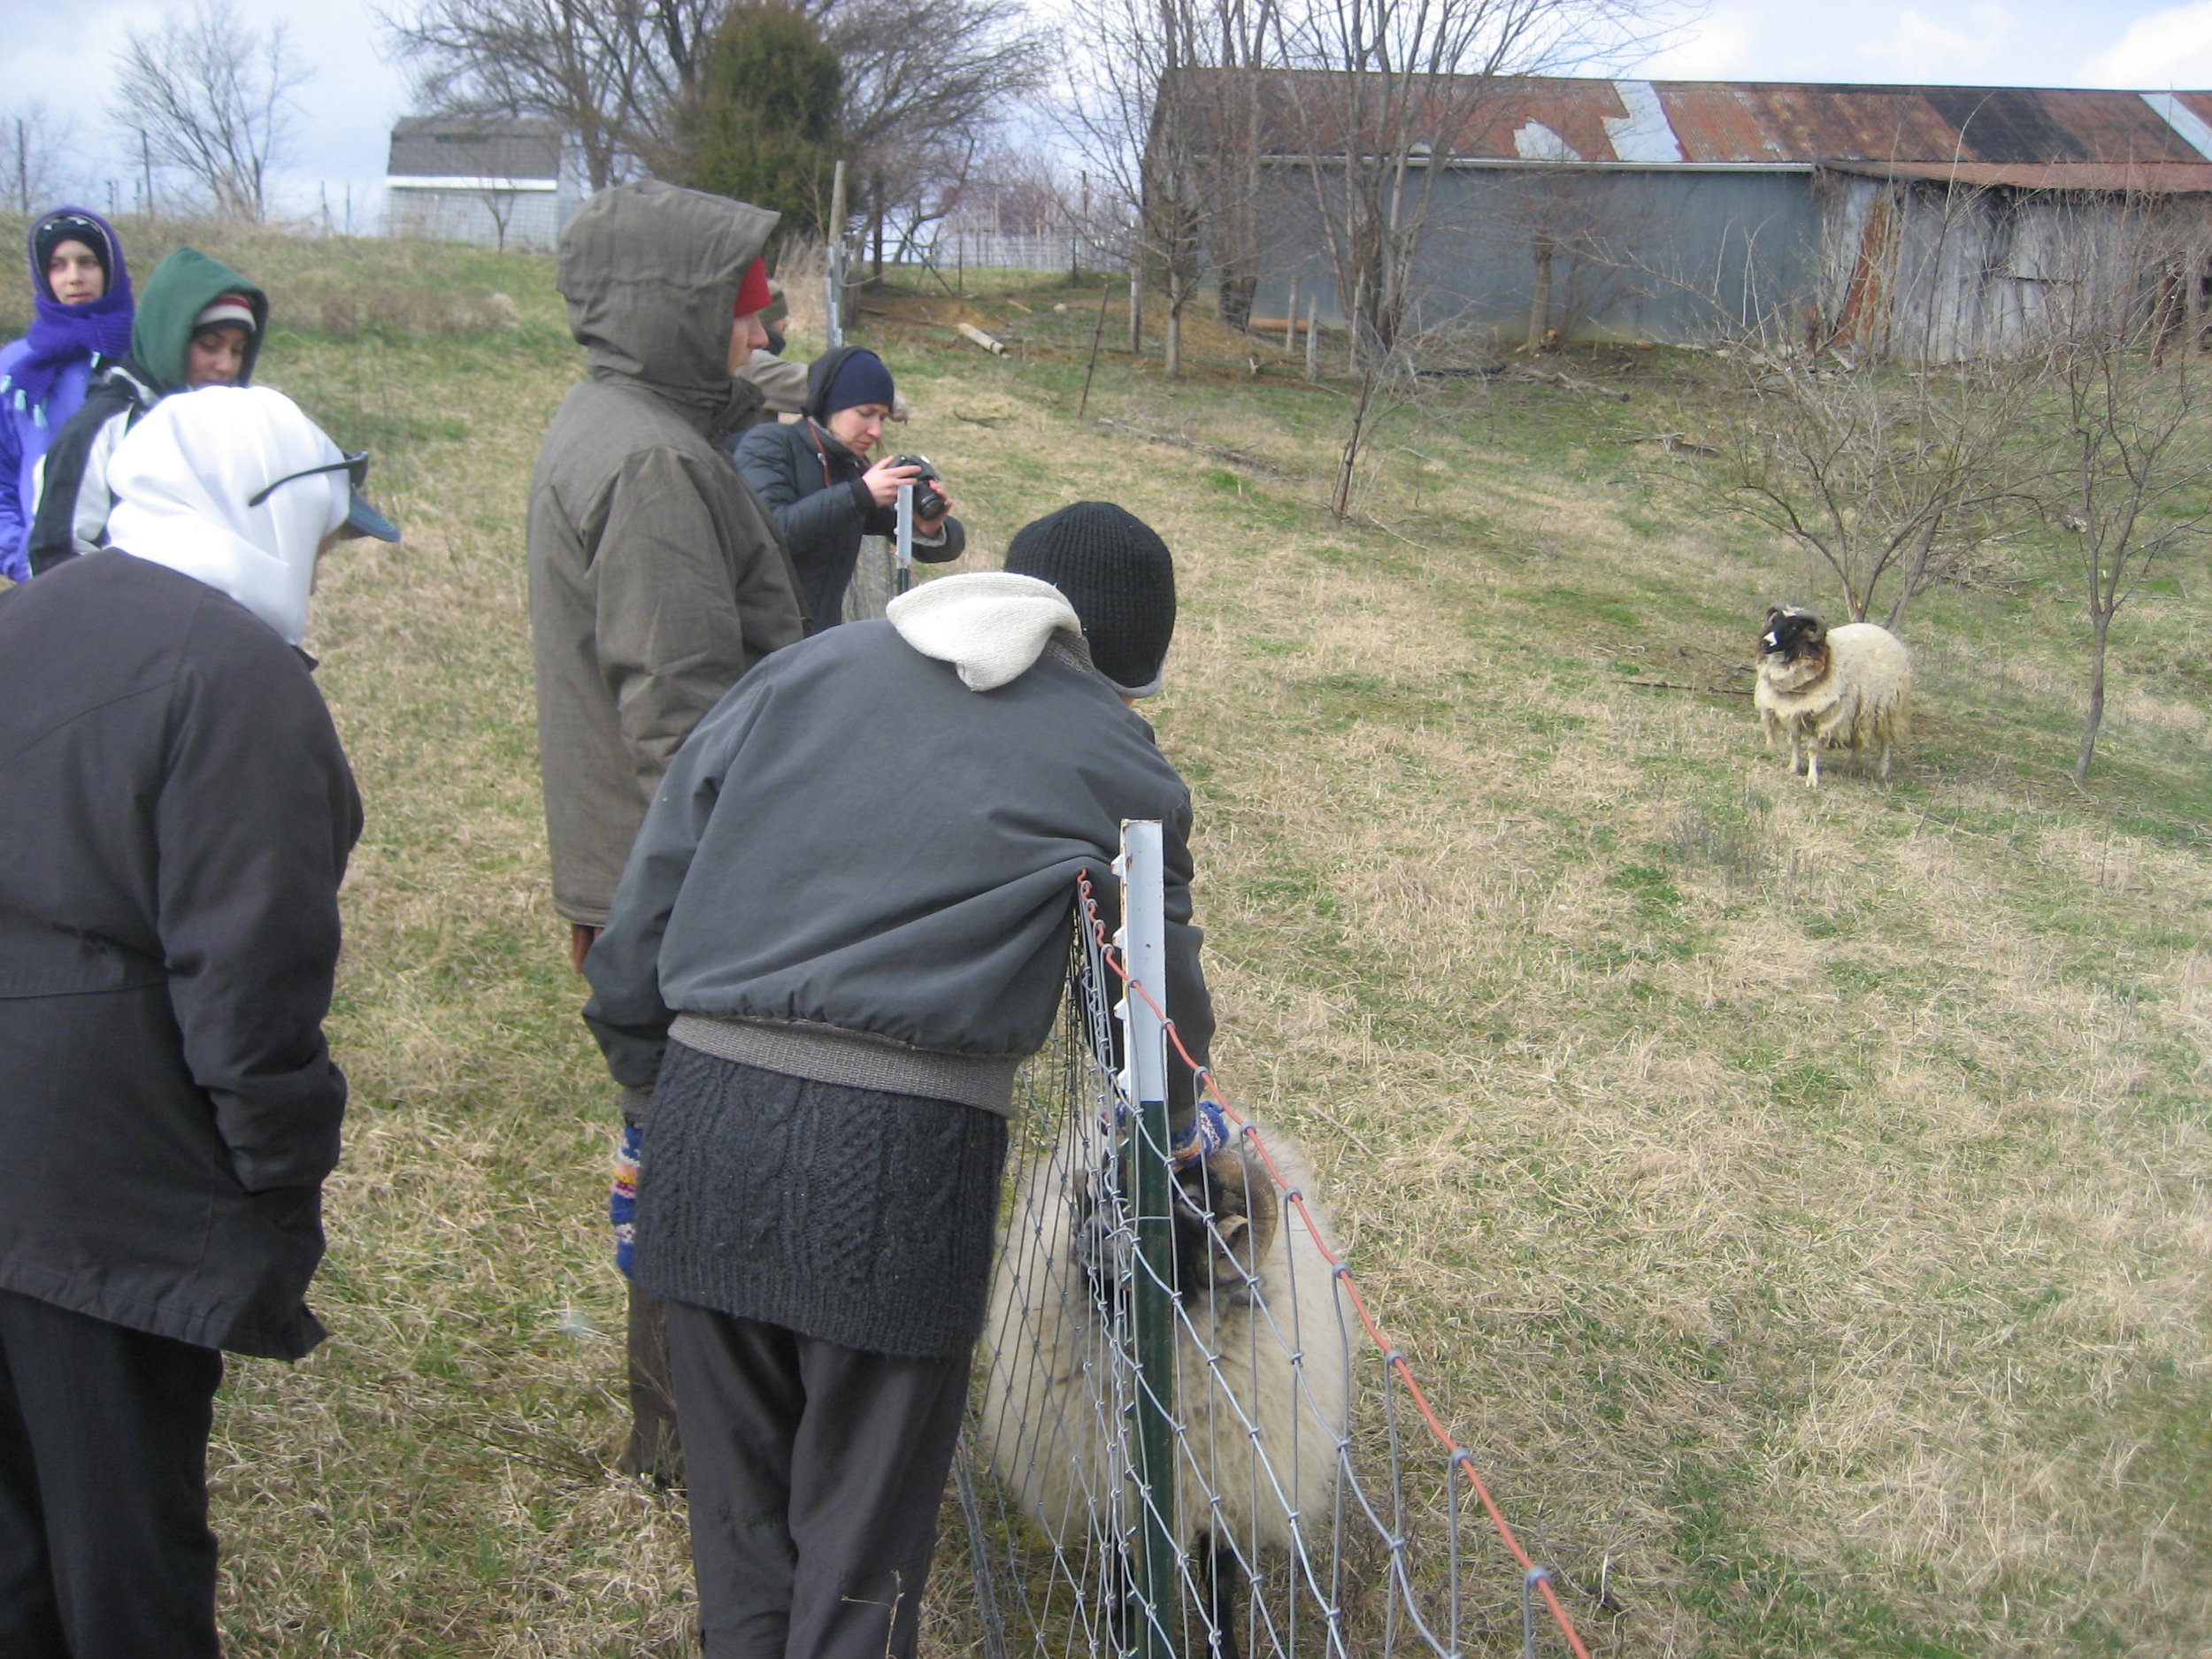 Students learning about Sheep Management